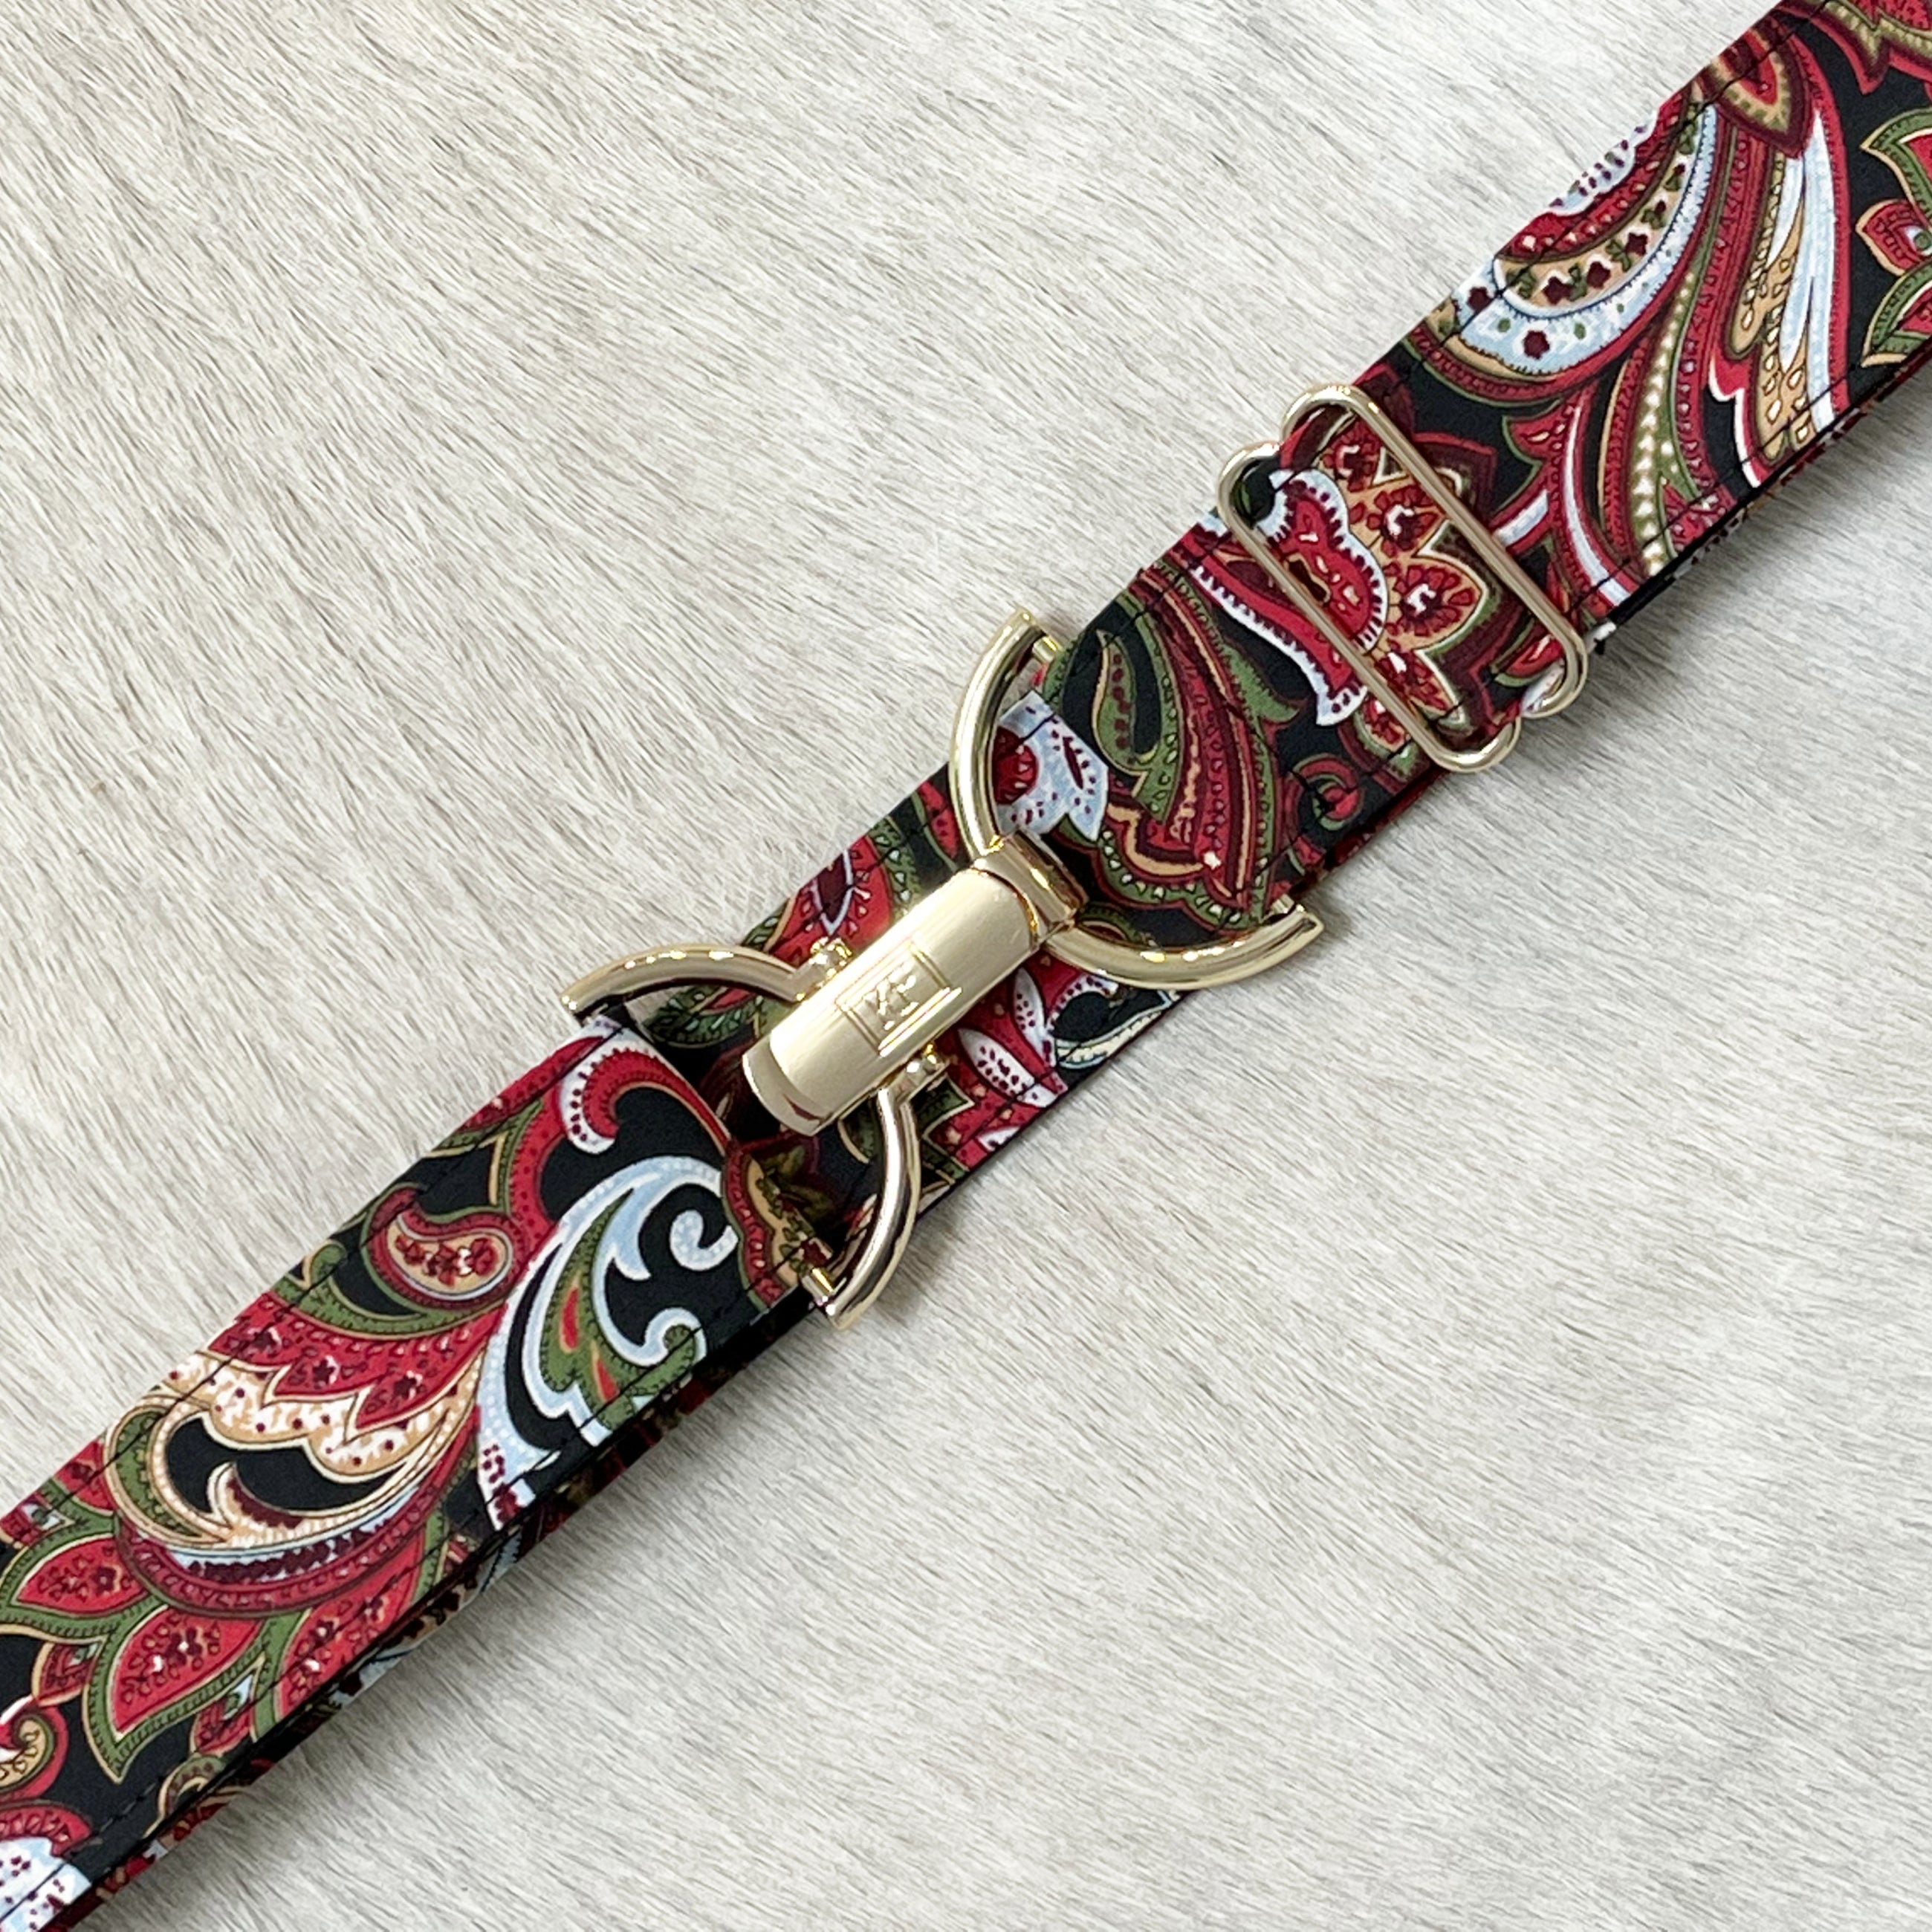 Deep red paisley belt with 1.5" gold clip buckle